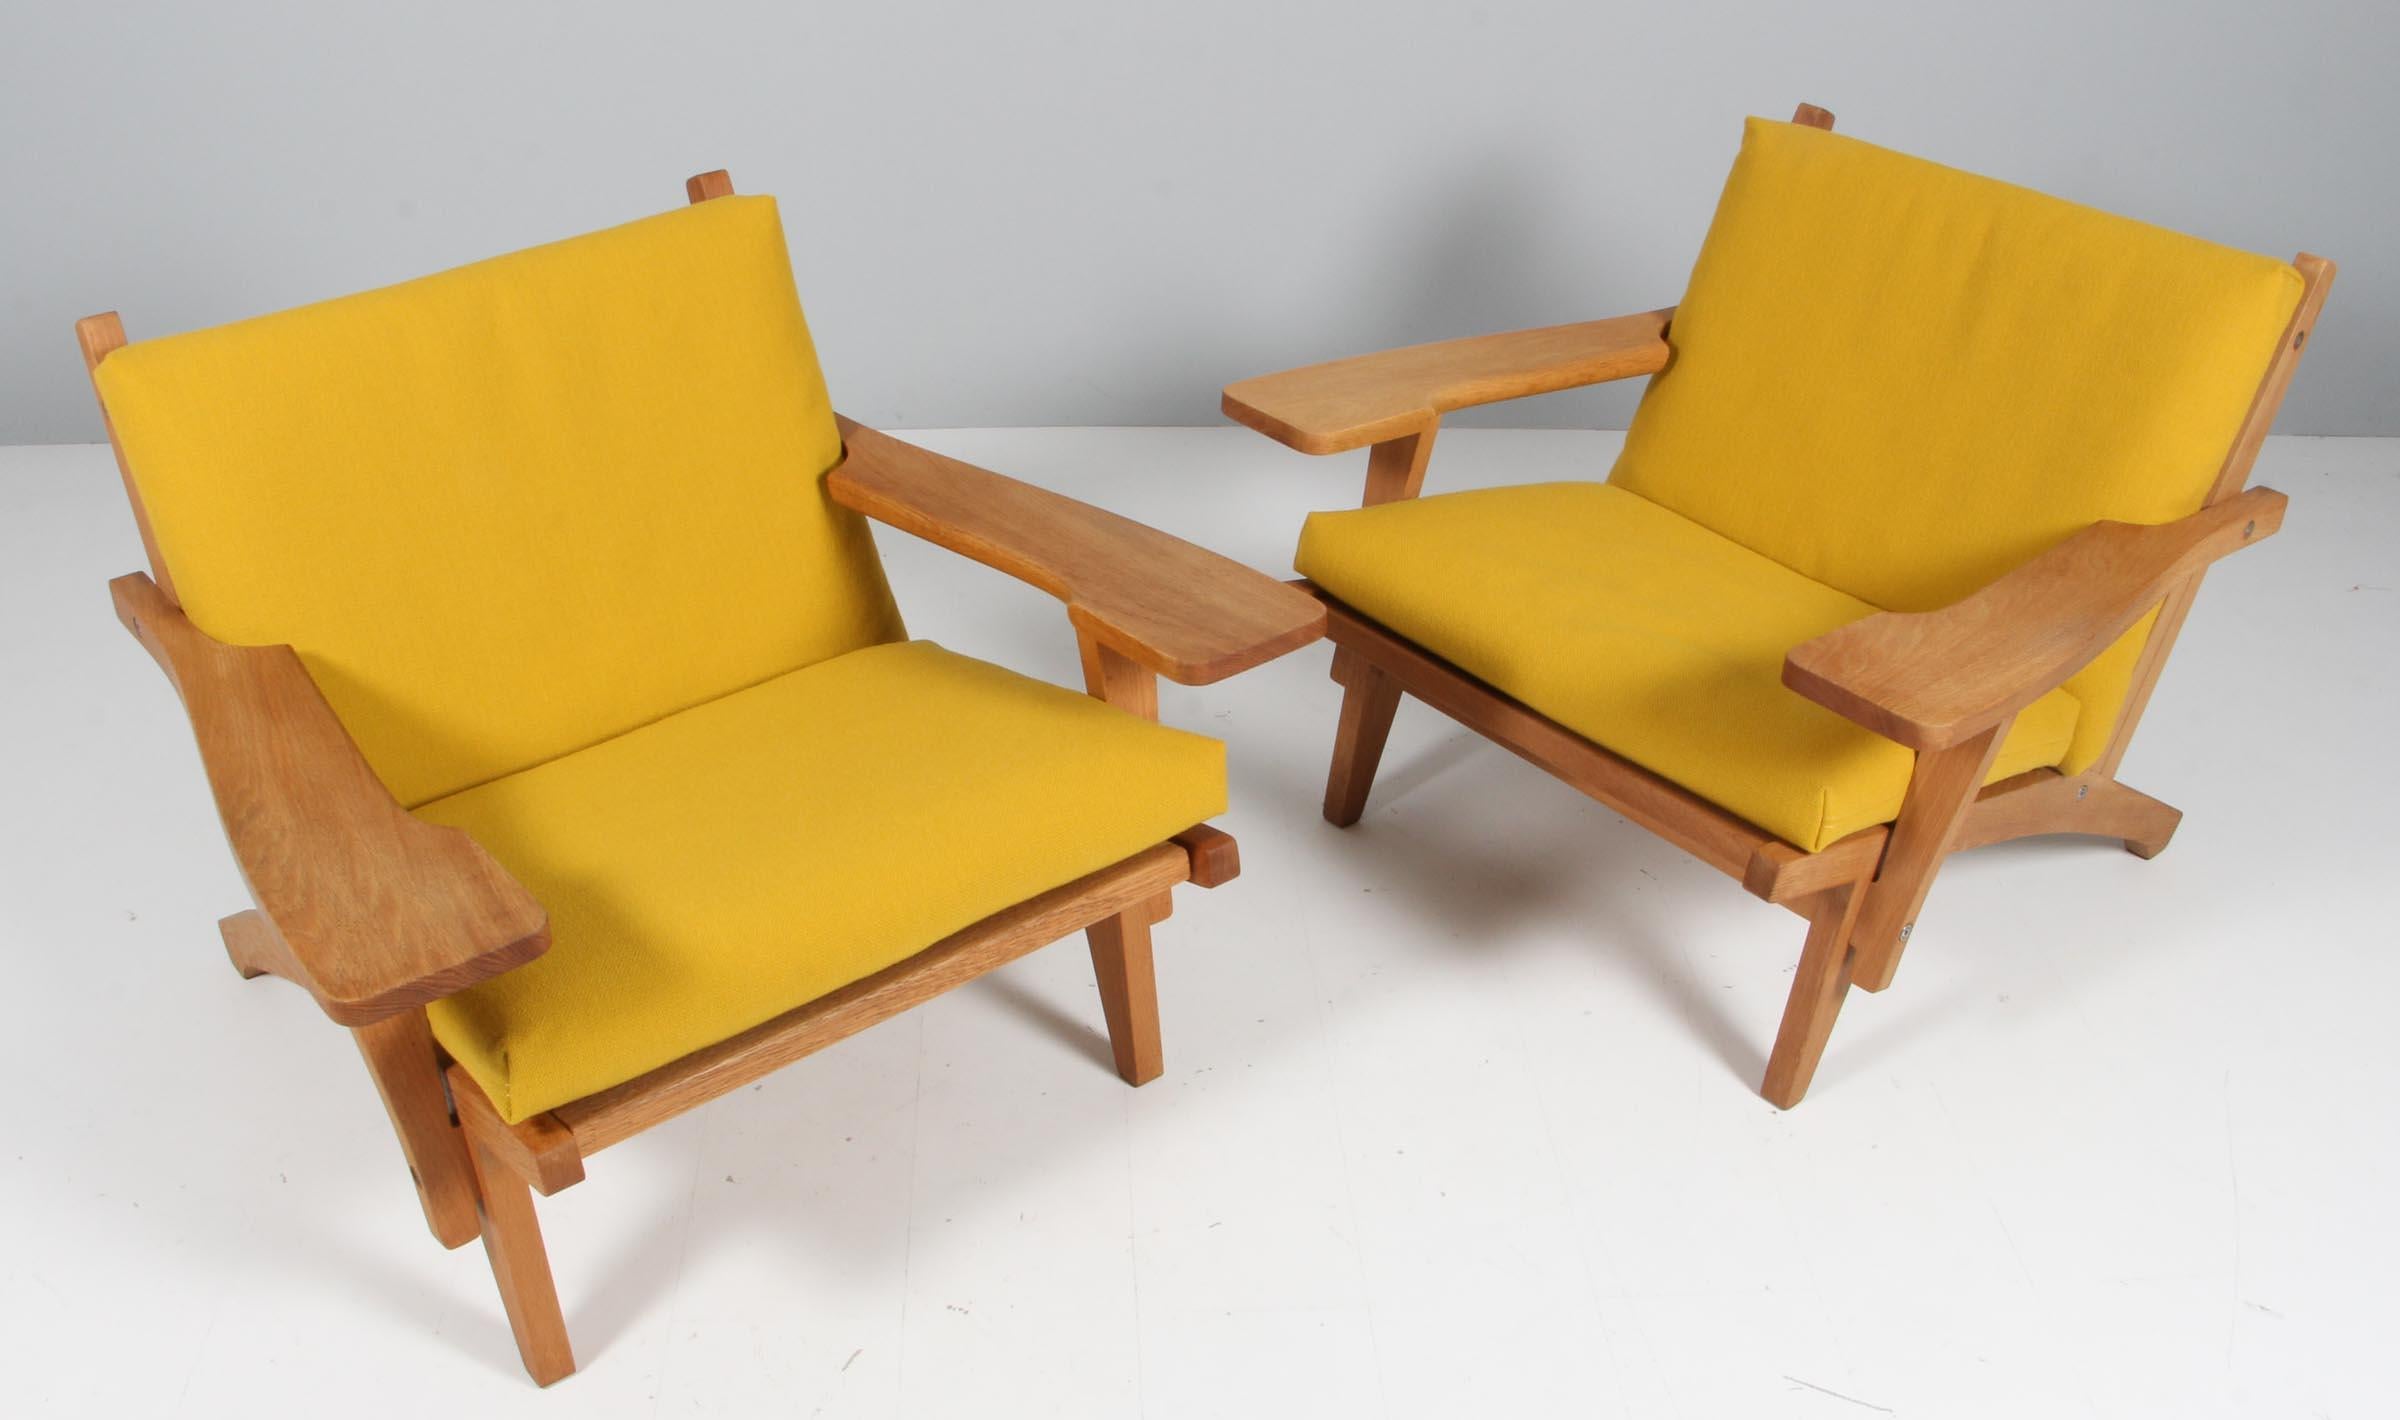 Hans J. Wegner lounge chair with loose cushions new upholstered with antifabric 130 from Kvadrat

Frame of oak. With armrests.

Model GE-370, made by GETAMA.